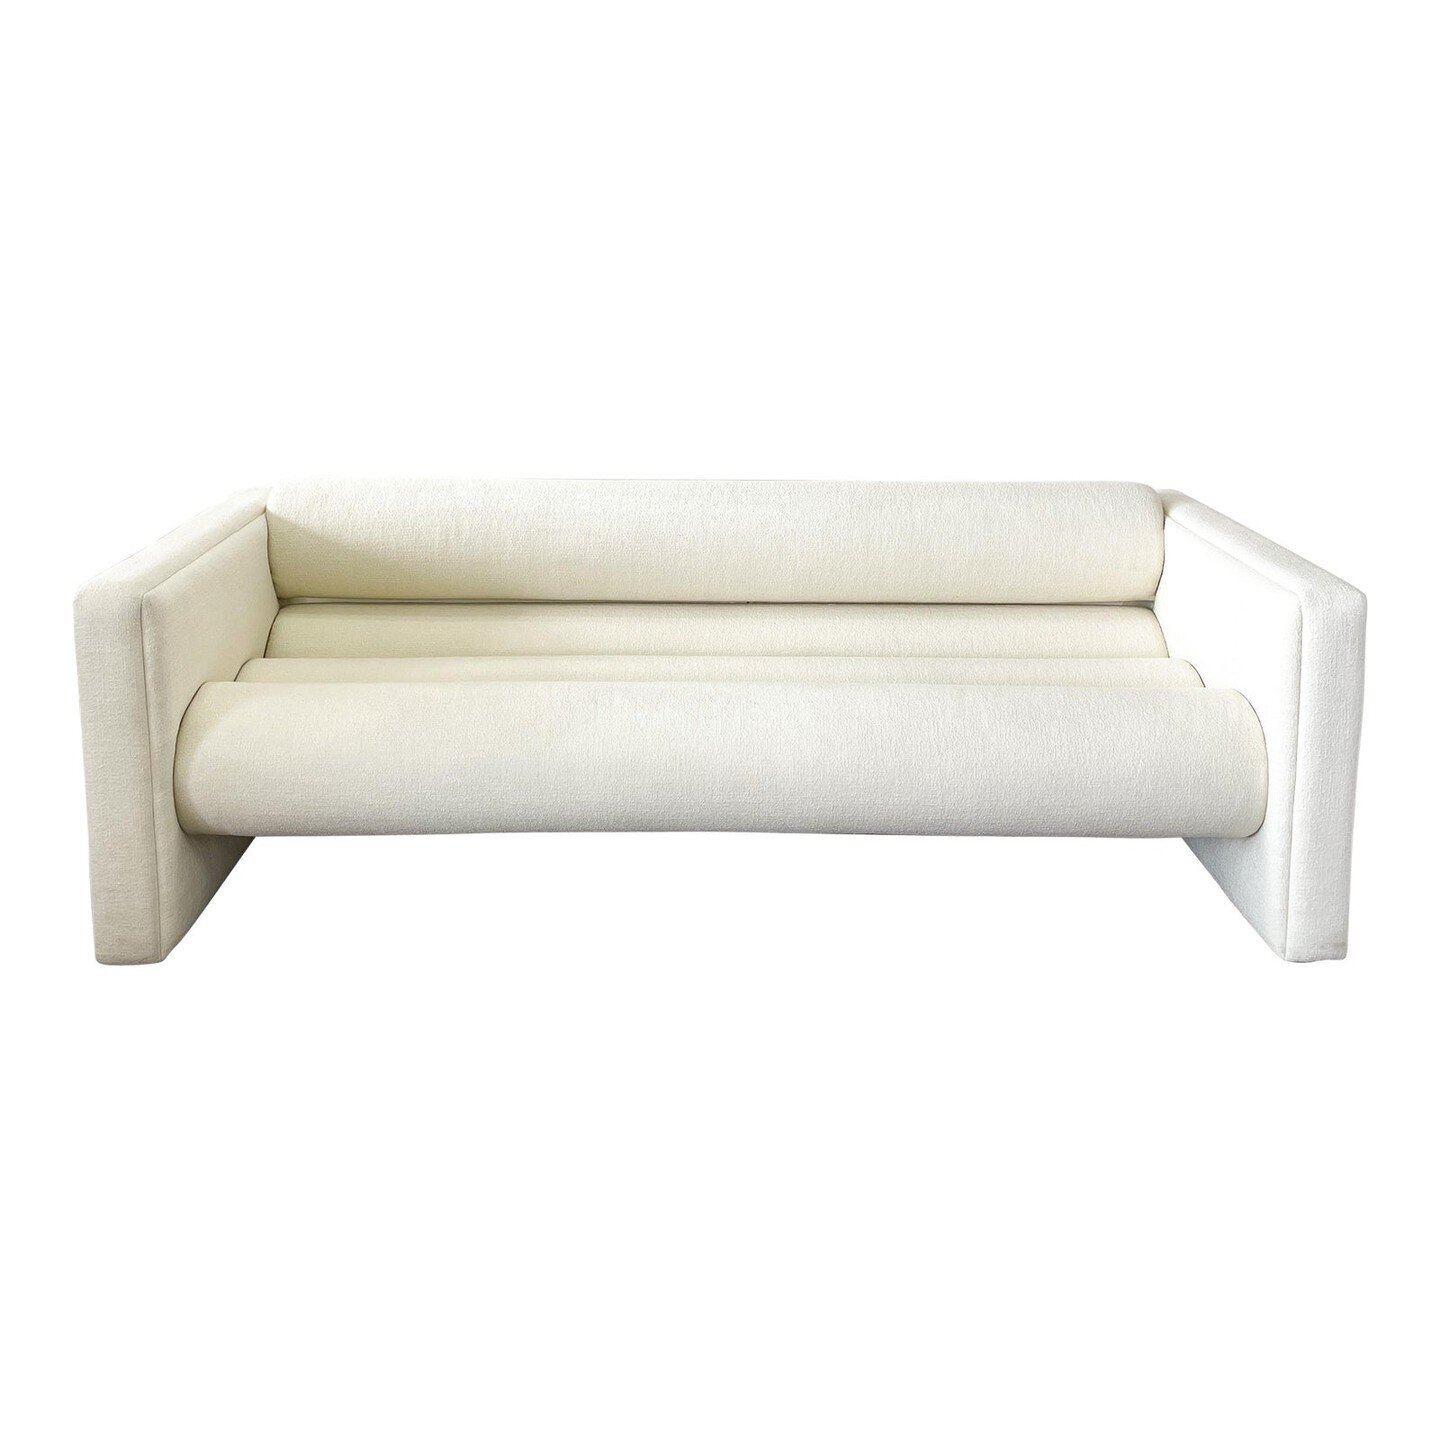 Postmodern Boucle Bolster Sofa

Postmodern Bolster Sofa. 

The sofa has a bolstered back and seat and it supports the back very well. Chic and comfortable. 

Dimensions:84ʺW &times; 38ʺD &times; 26ʺH

Materials: Textiles and Wood

May be Customed to 